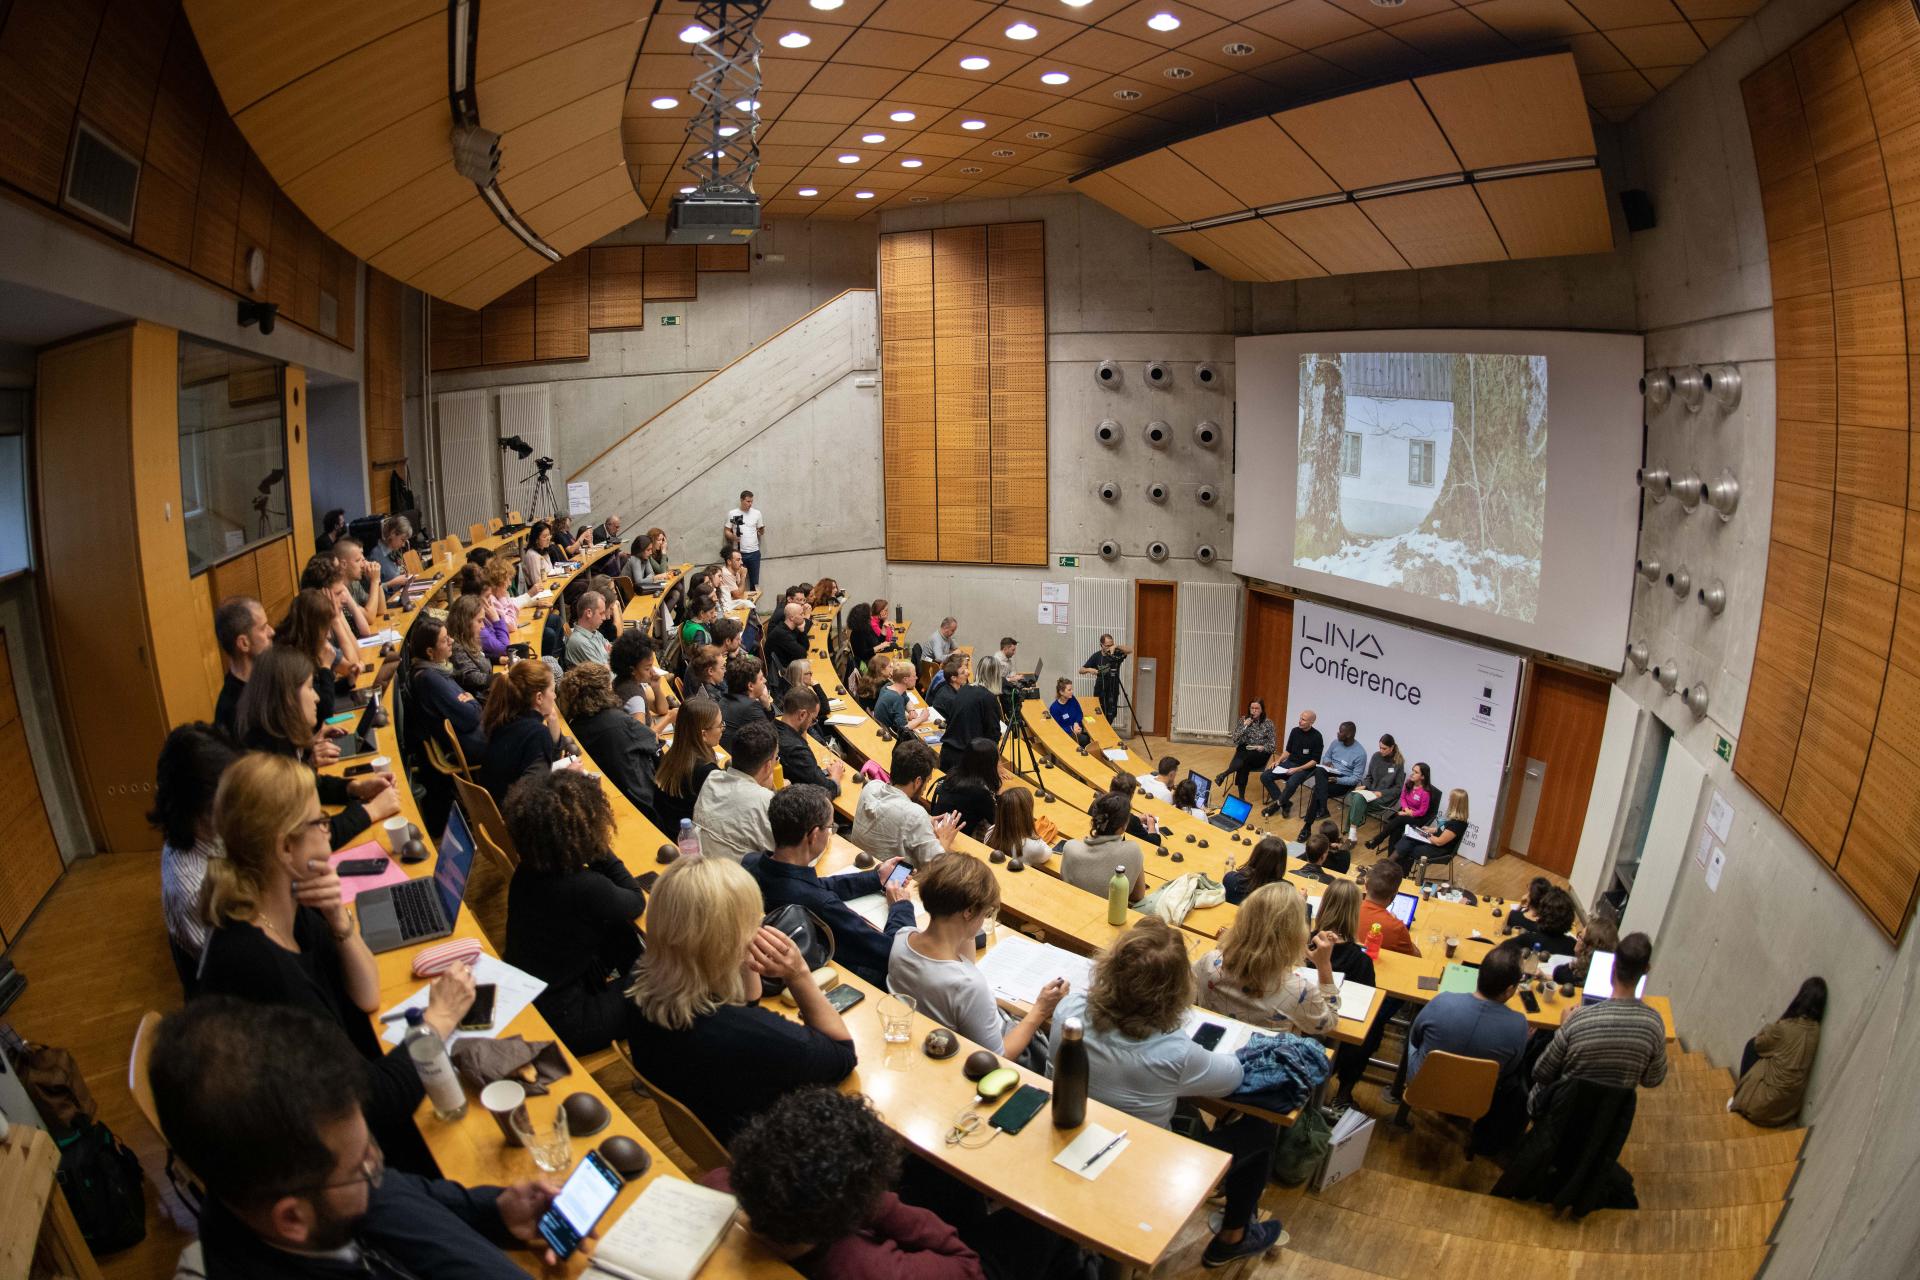 Conference at the Faculty of Architecture. | Photo © Urban Cerjak